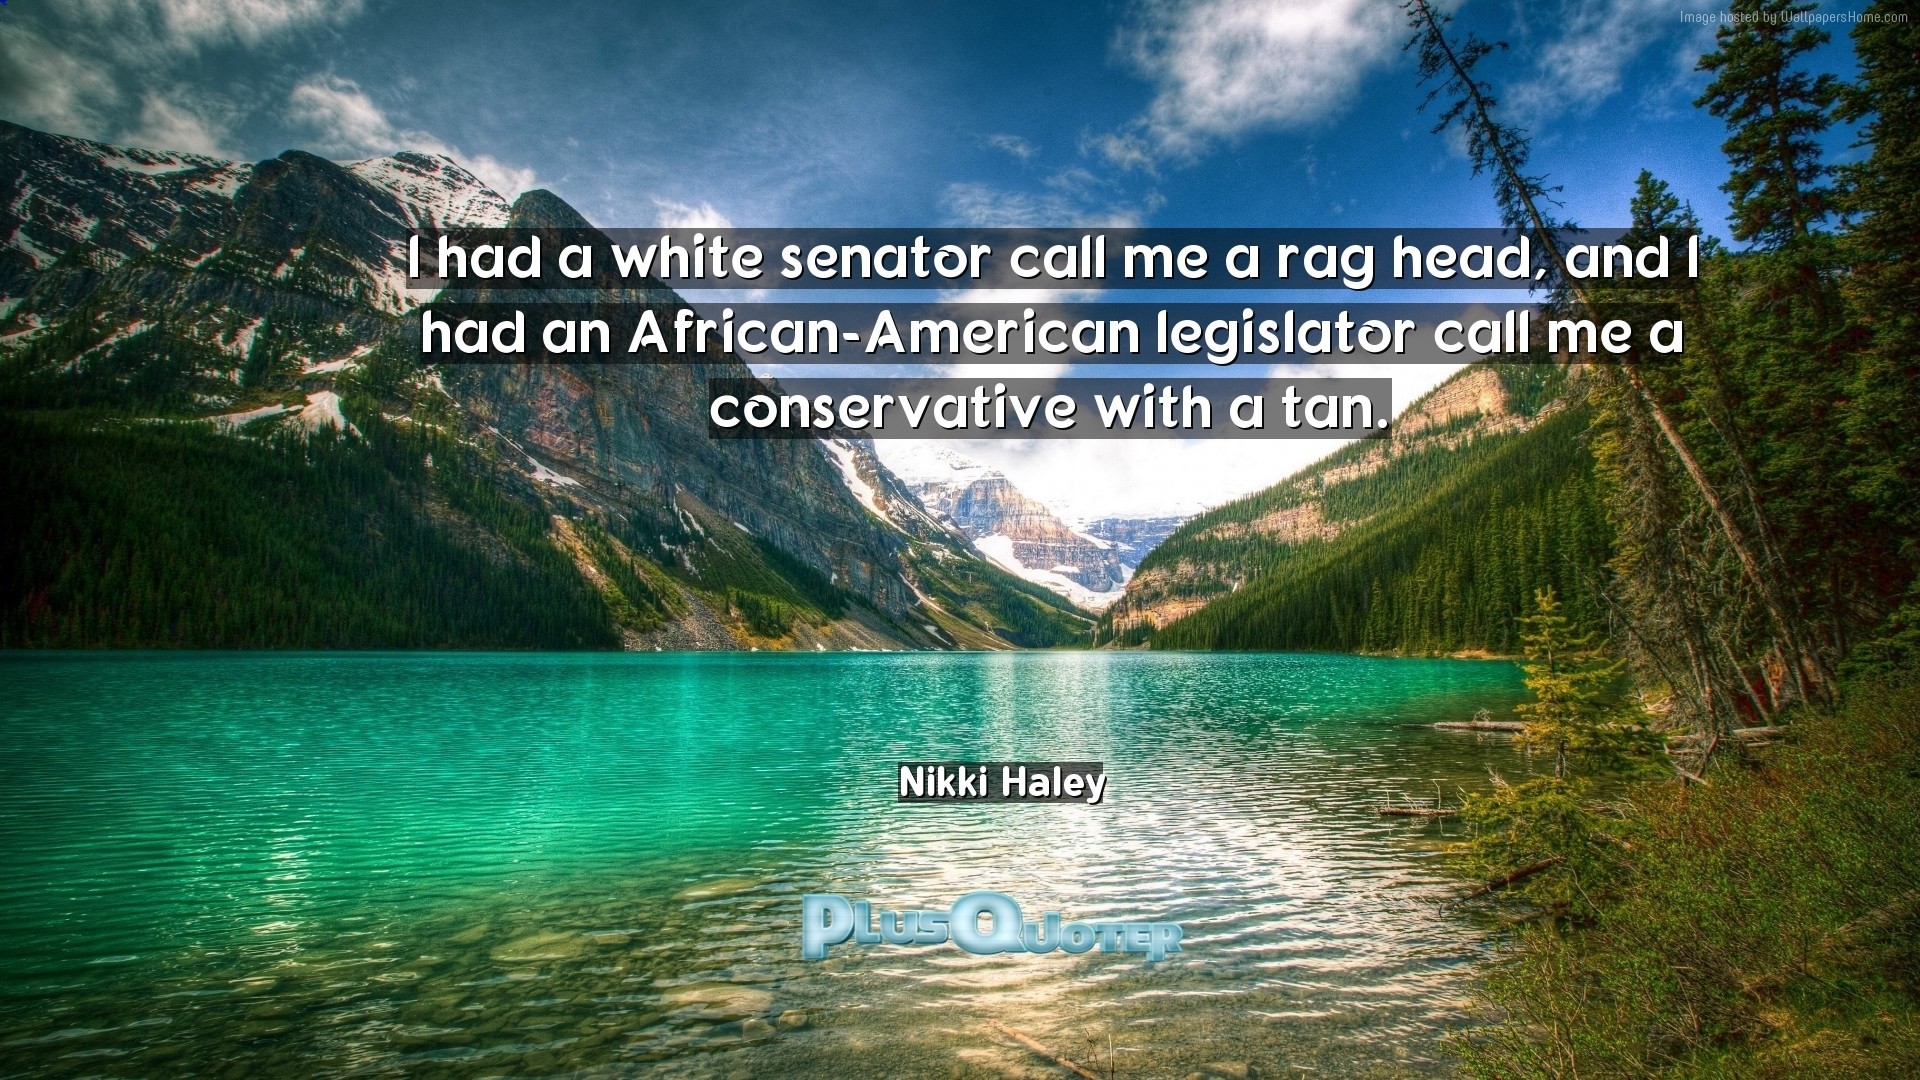 1920x1080 Download Wallpaper with inspirational Quotes- "I had a white senator call  me a rag